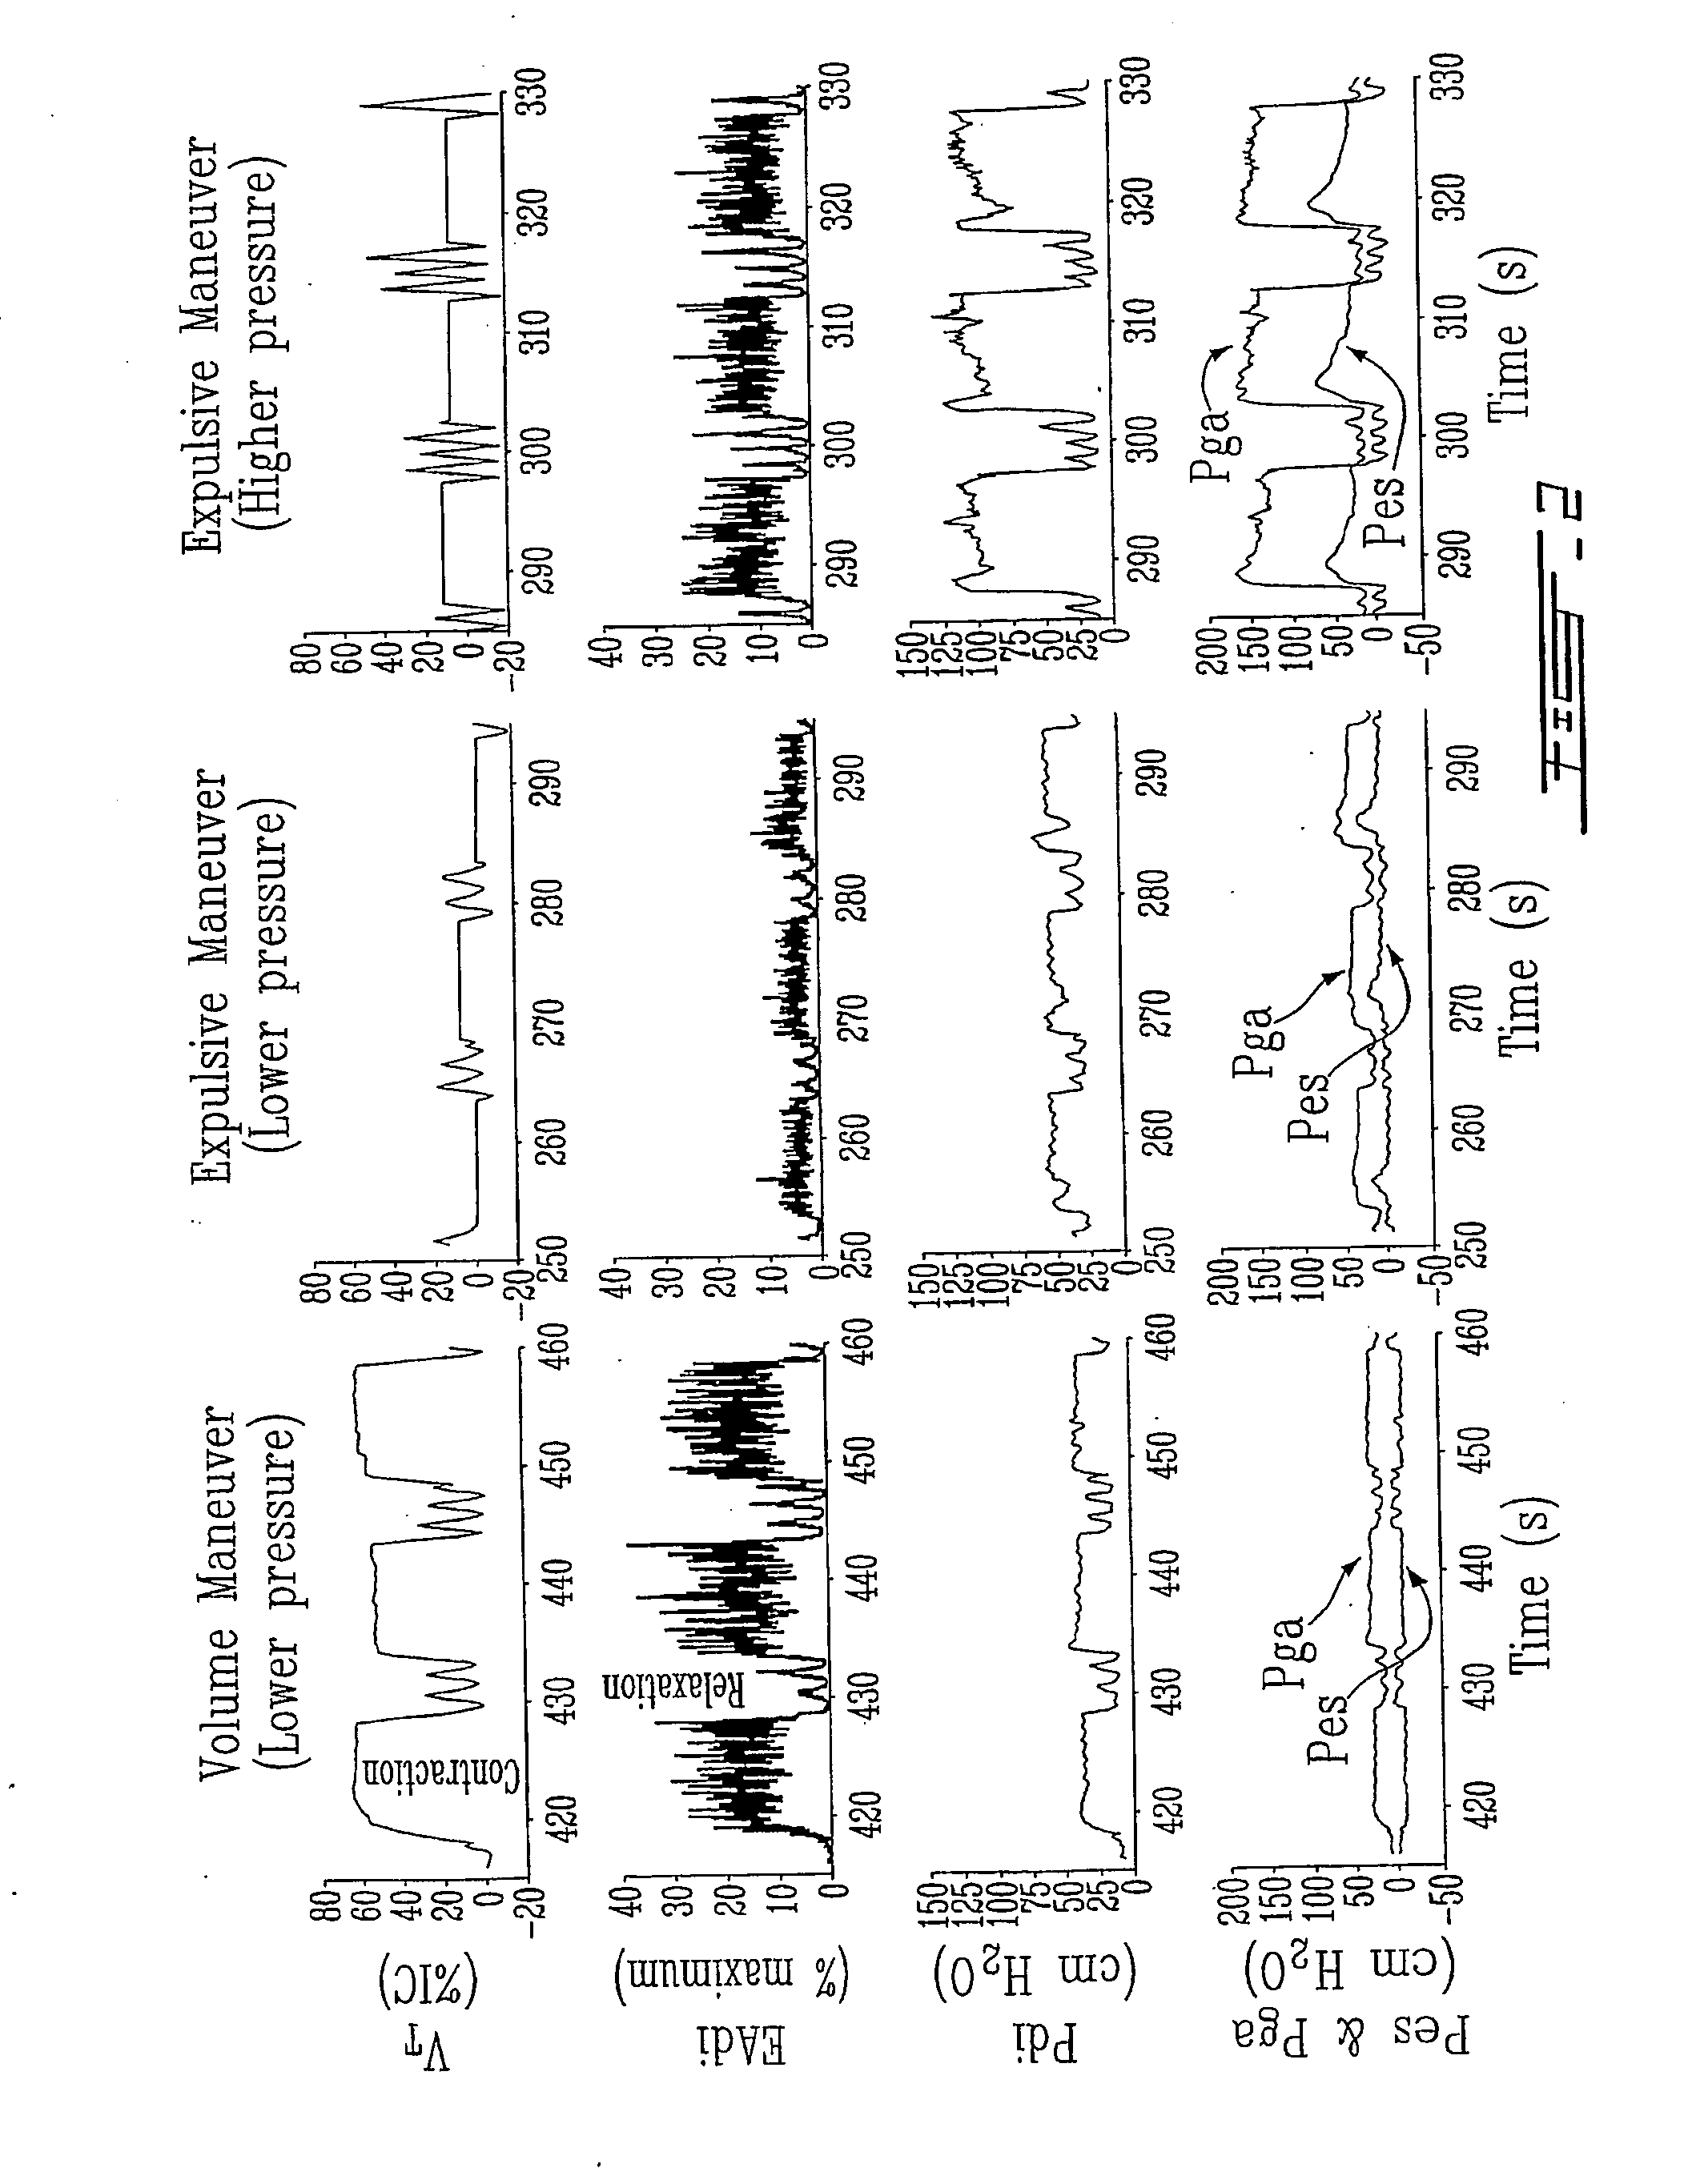 Method and Device Using Myoelectrical Activity for Optimizing a Patient's Ventilatory Assist